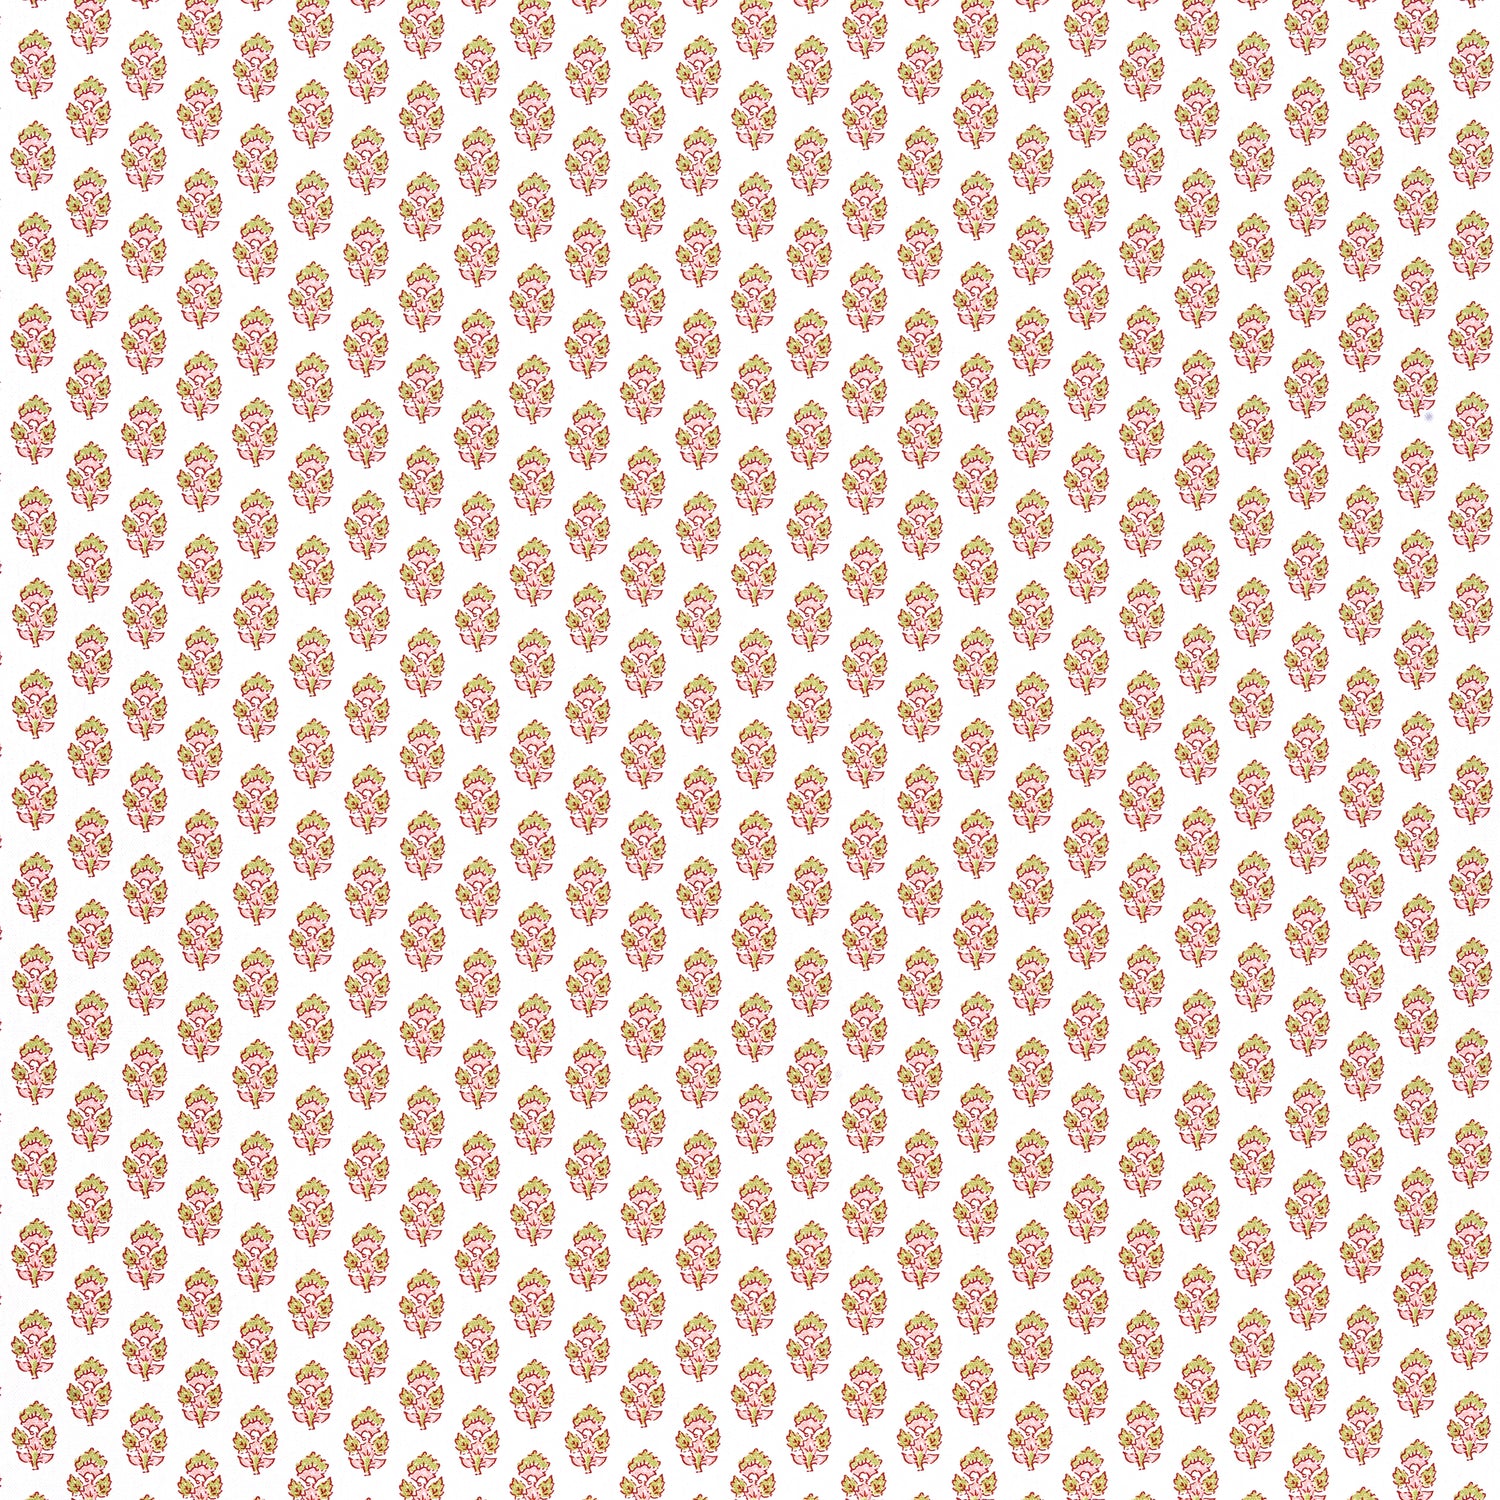 Julian fabric in blush color - pattern number AF15162 - by Anna French in the Antilles collection